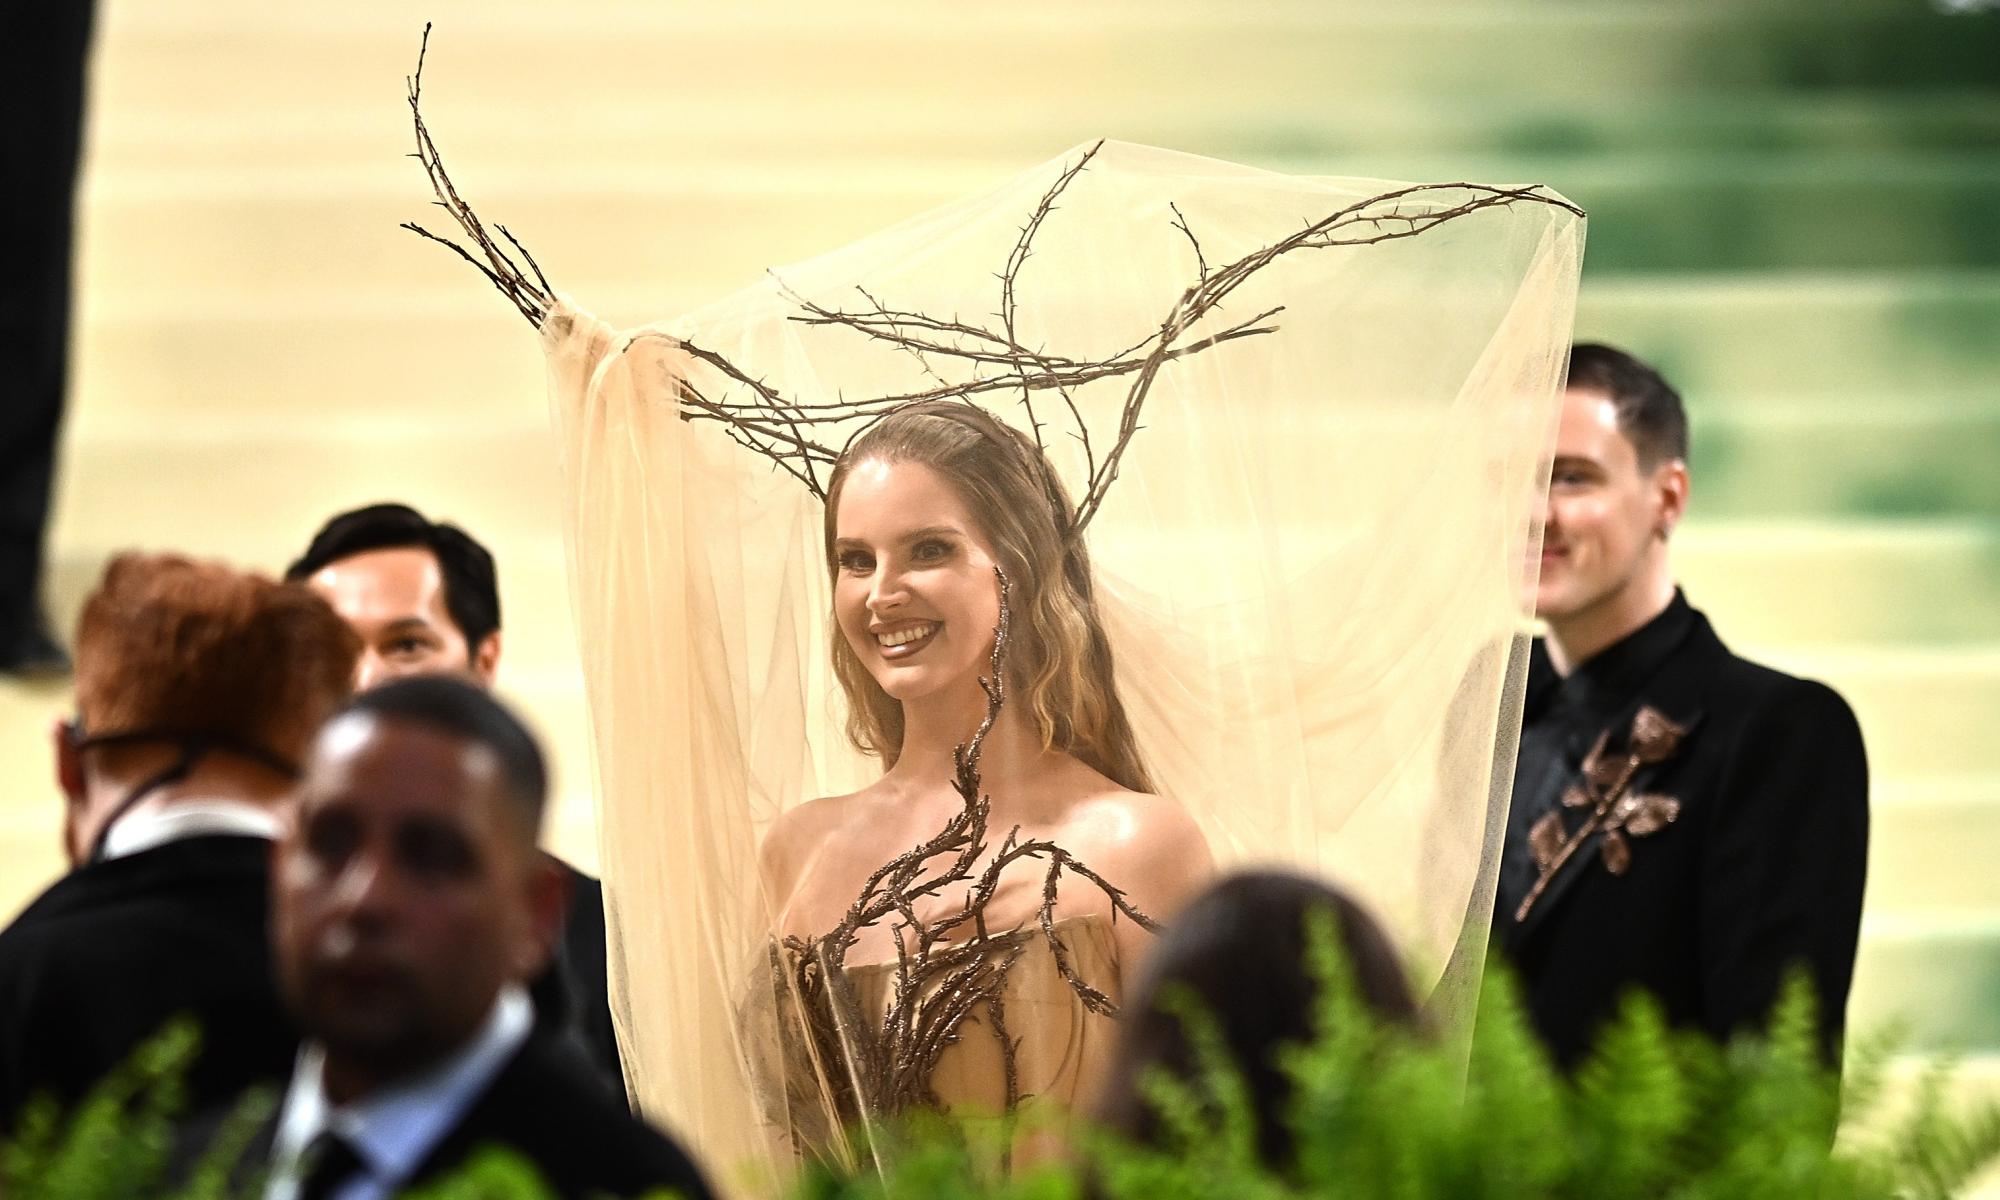 amazon, frock horror! in these dark times, let us be grateful for the ludicrous spectacle of the met gala